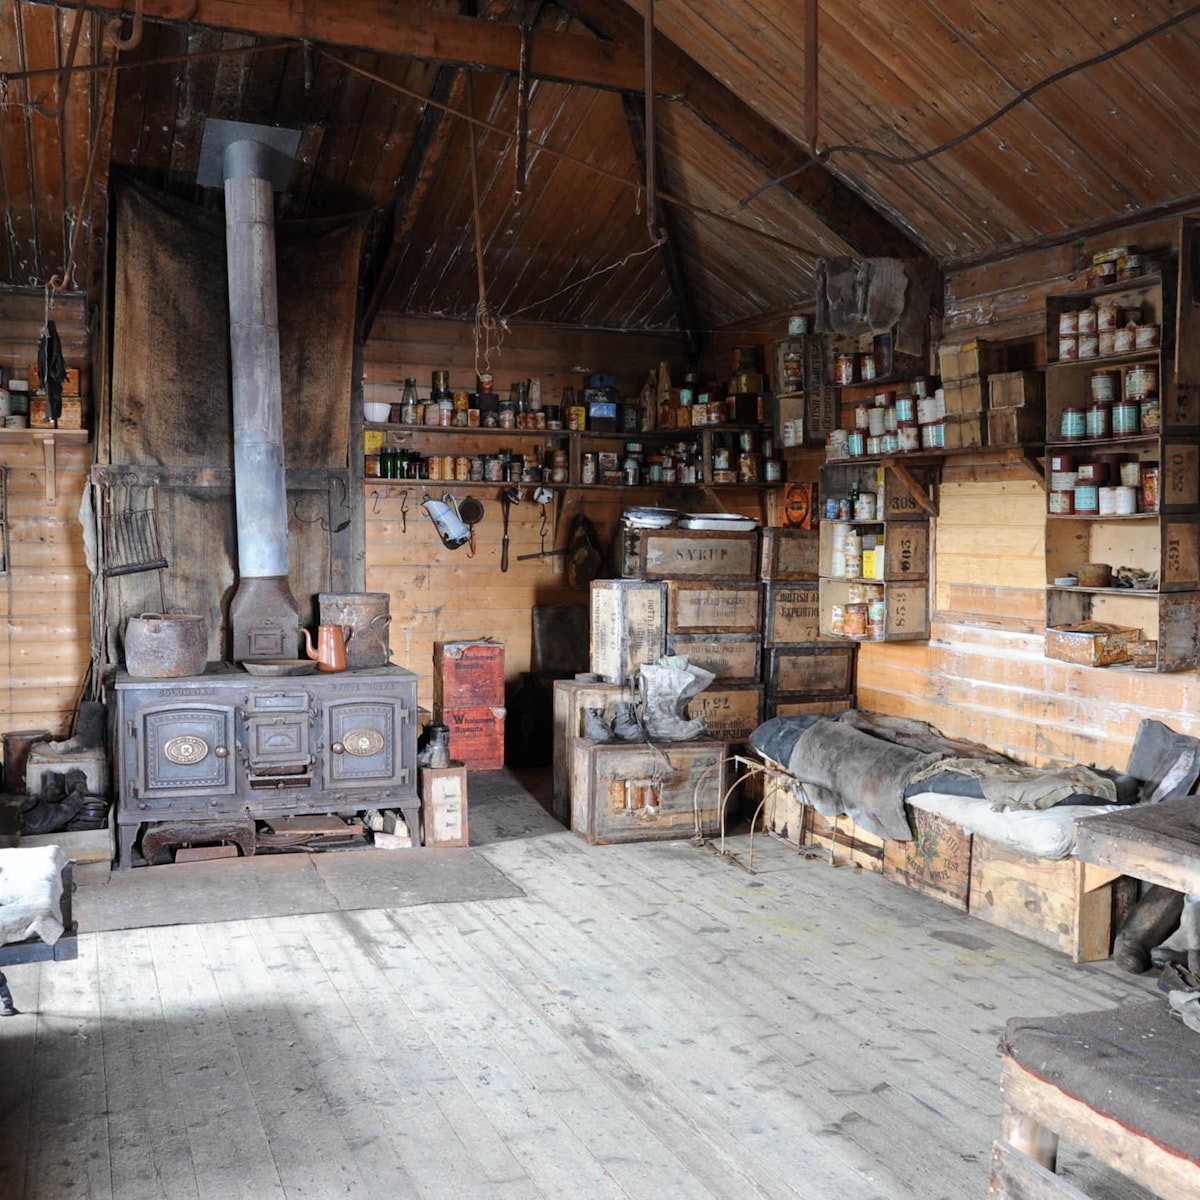 ANTARTICA - JANUARY 14:  In this handout image provided by the Monaco Palace, a general view of the wooden hut built by Earnest Shackleton in 1907, visited by Prince Albert Of Monaco, now kept by Dr David G Ainley in Cape Royds on January 15, 2009 in Antartica.  (Photo by Monaco Palace via Getty Images)